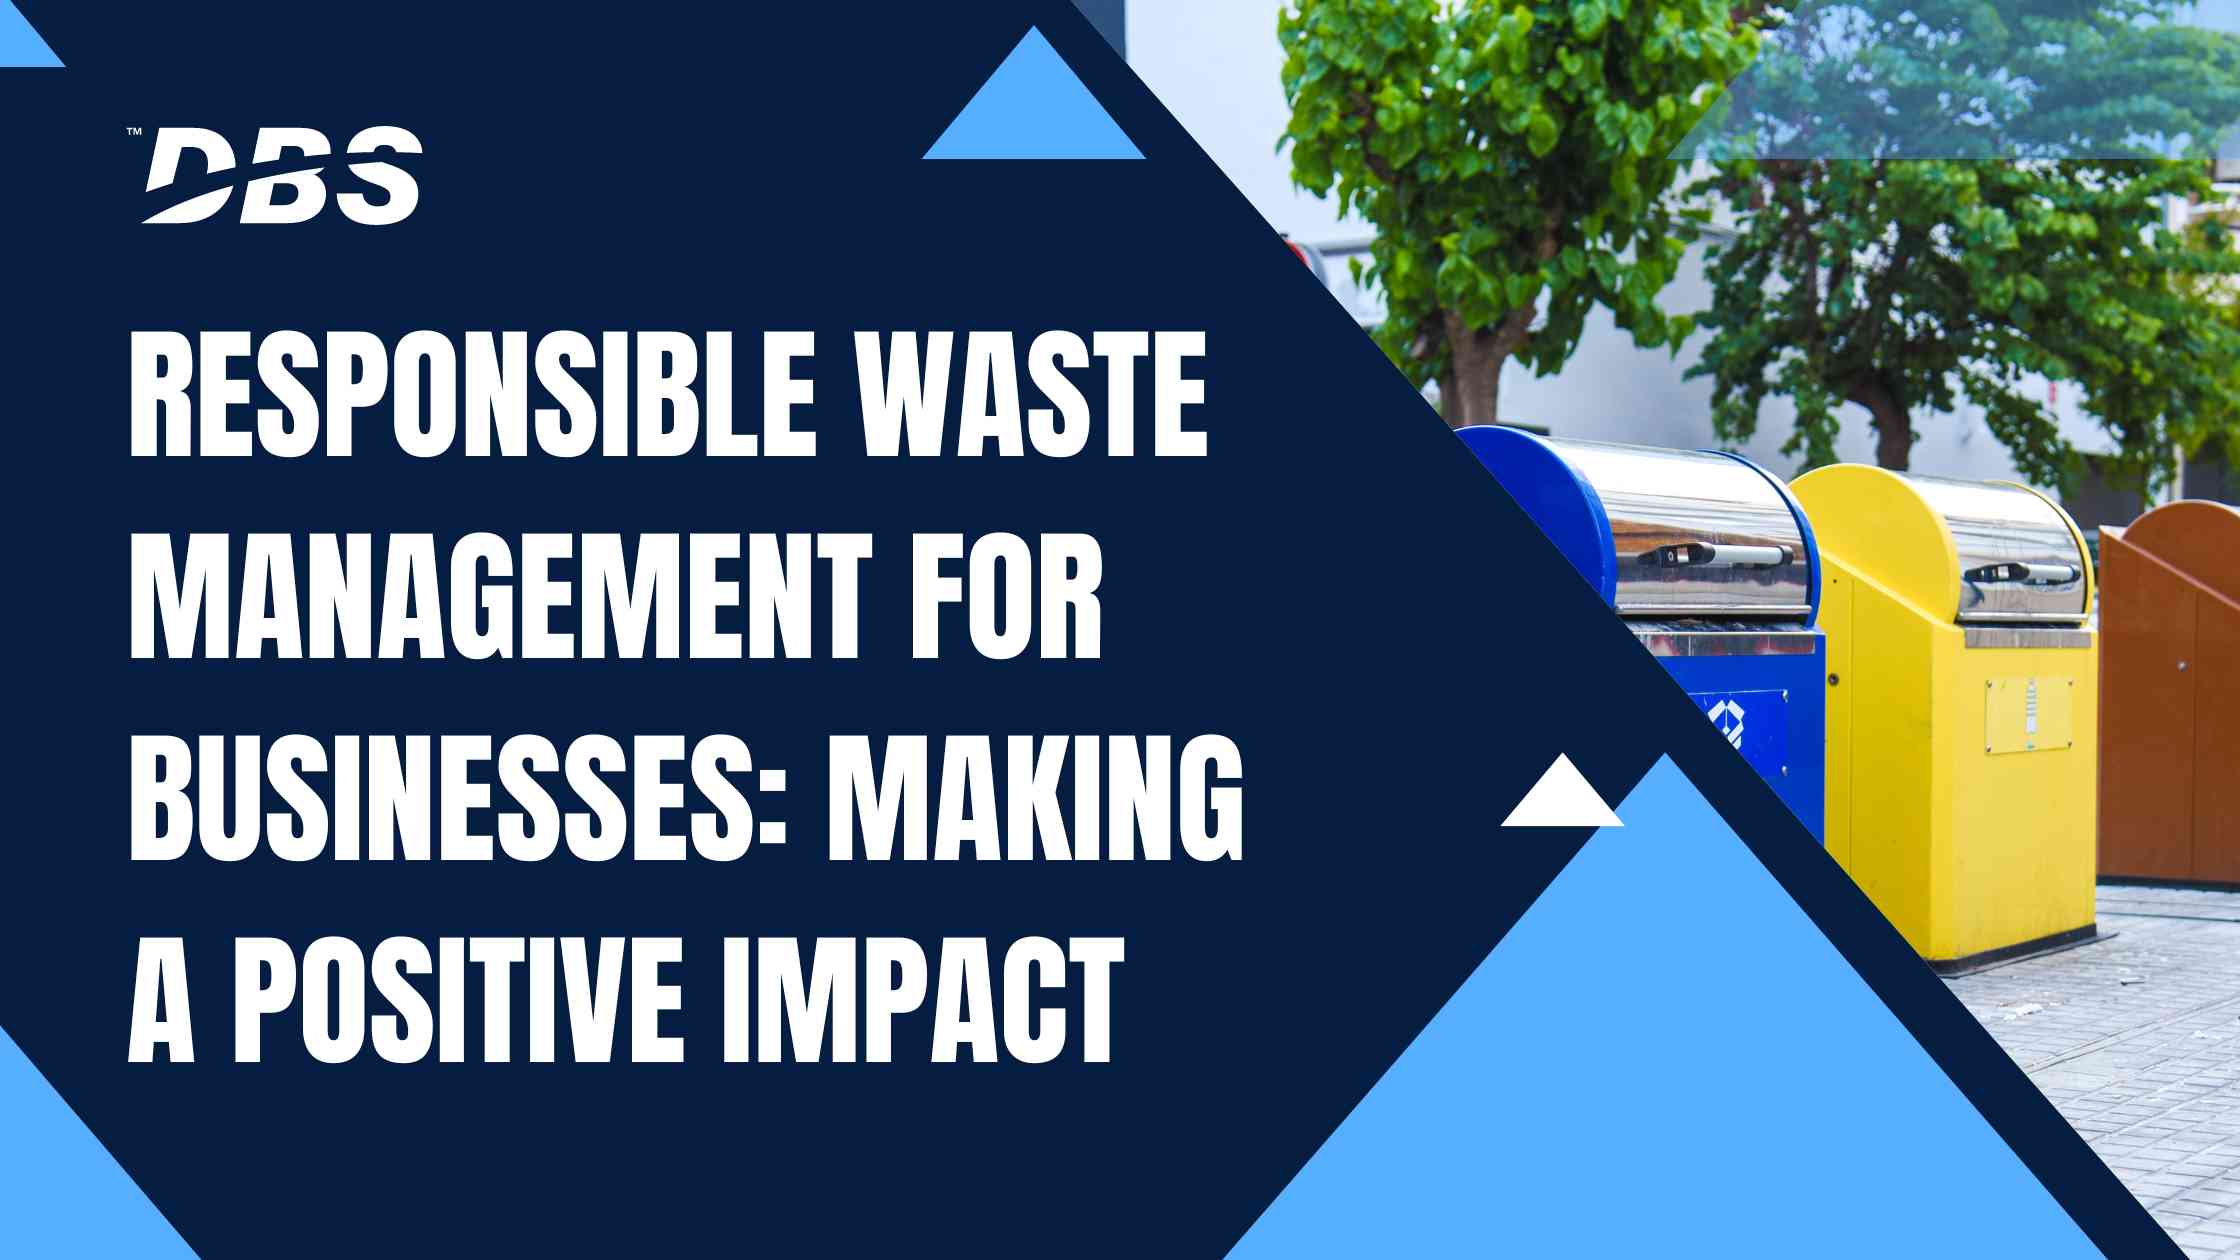 Responsible waste management for businesses